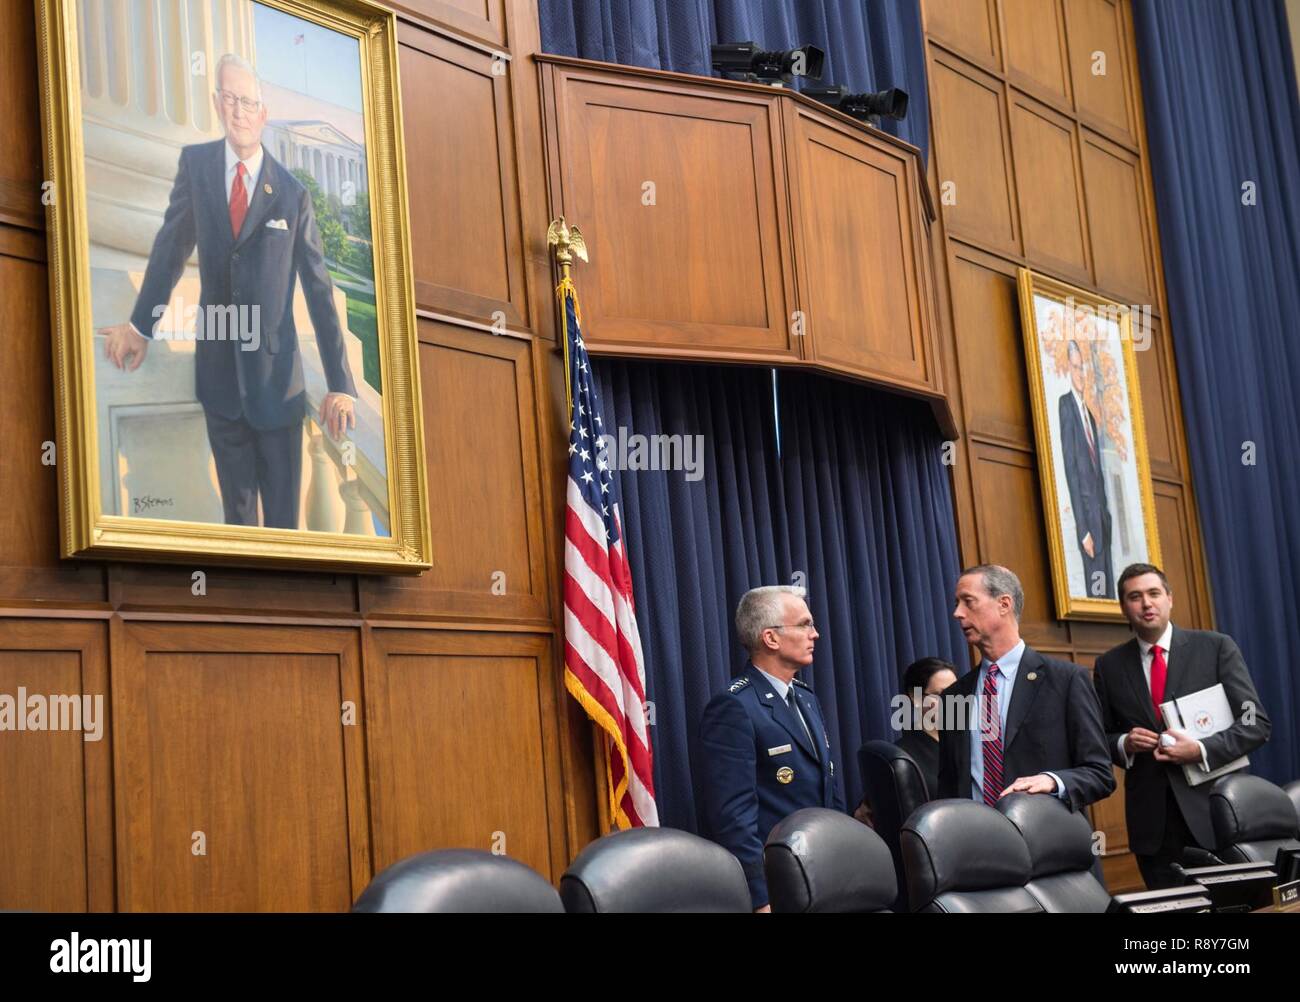 U.S. Air Force Gen. Selva, Vice Chairman of the Joint Chiefs of Staff, speaks with U.S. Rep. Mac Thornberry, Chairman of the House Armed Services Committee (HASC), after a HASC hearing on Capitol Hill, March 7, 2017. Gen. Selva, testified alongside U.S. Air Force Gen. John E. Hyten, commander of U.S. Strategic Command; U.S. Navy Adm. Bill Moran, Vice Chief of Naval Operations; and U.S. Air Force Vice Chief of Staff Gen. Stephen Wilson. They spoke about the continuing relevance of U.S. nuclear forces for our national security and the steps the Joint Force is taking to modernize and replace them Stock Photo